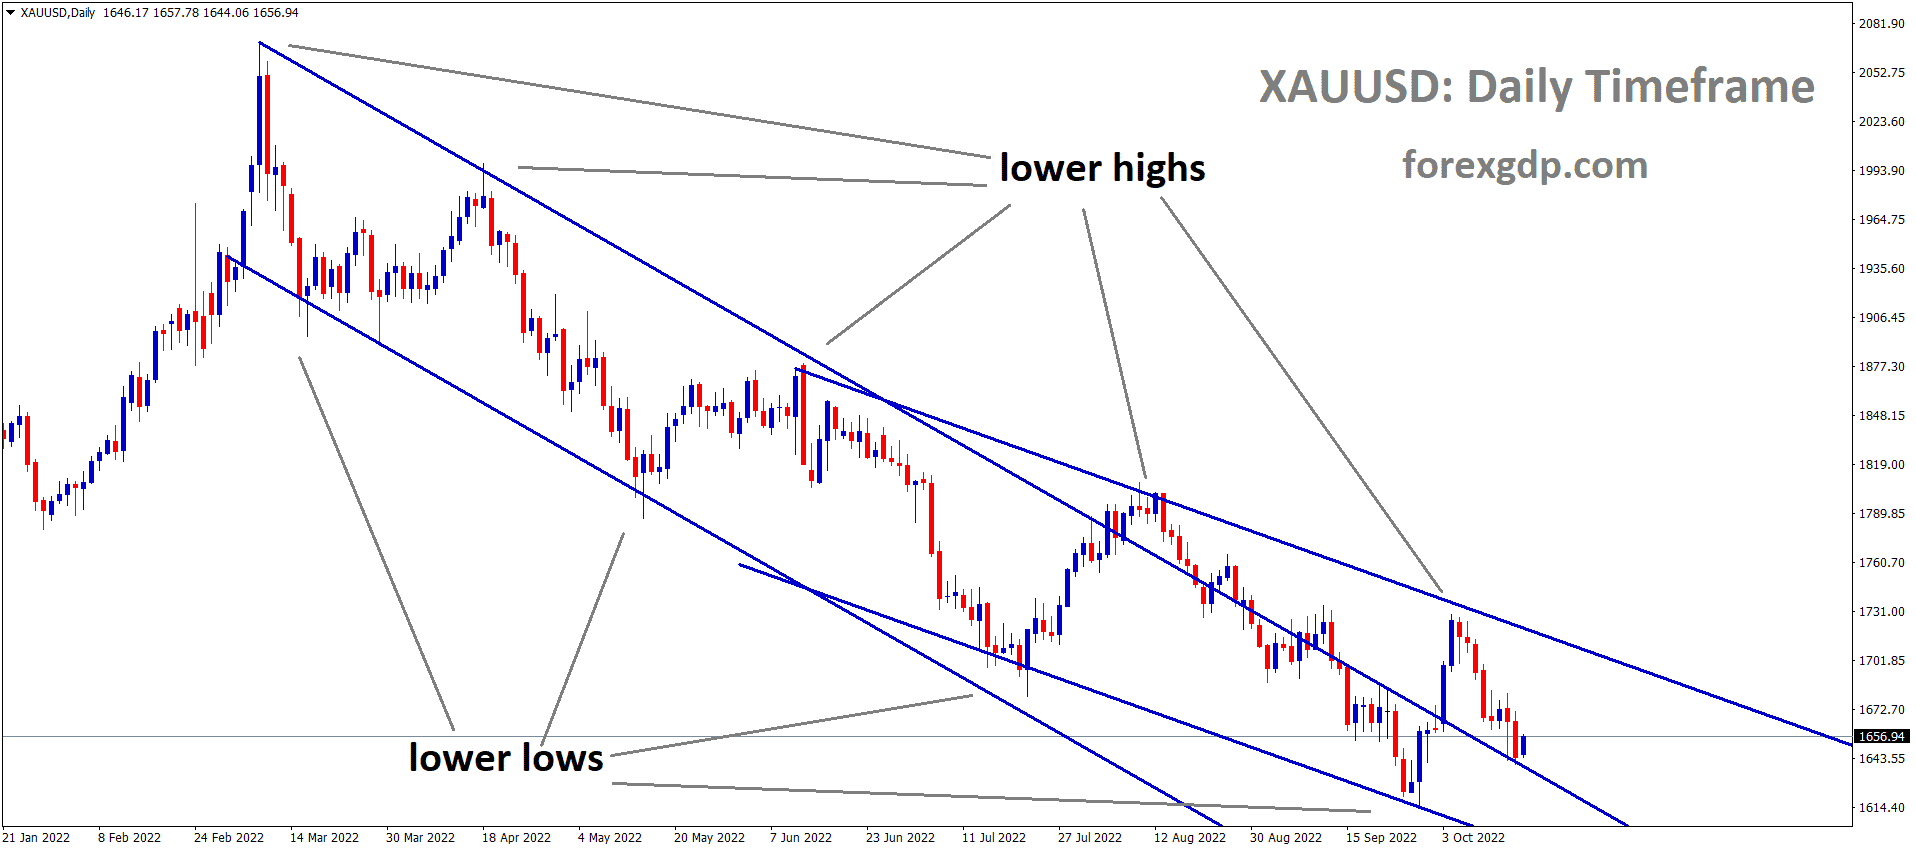 XAUUSD Gold price has broken the Major Descending channel pattern and the market has retested the broken area of the Descending channel.